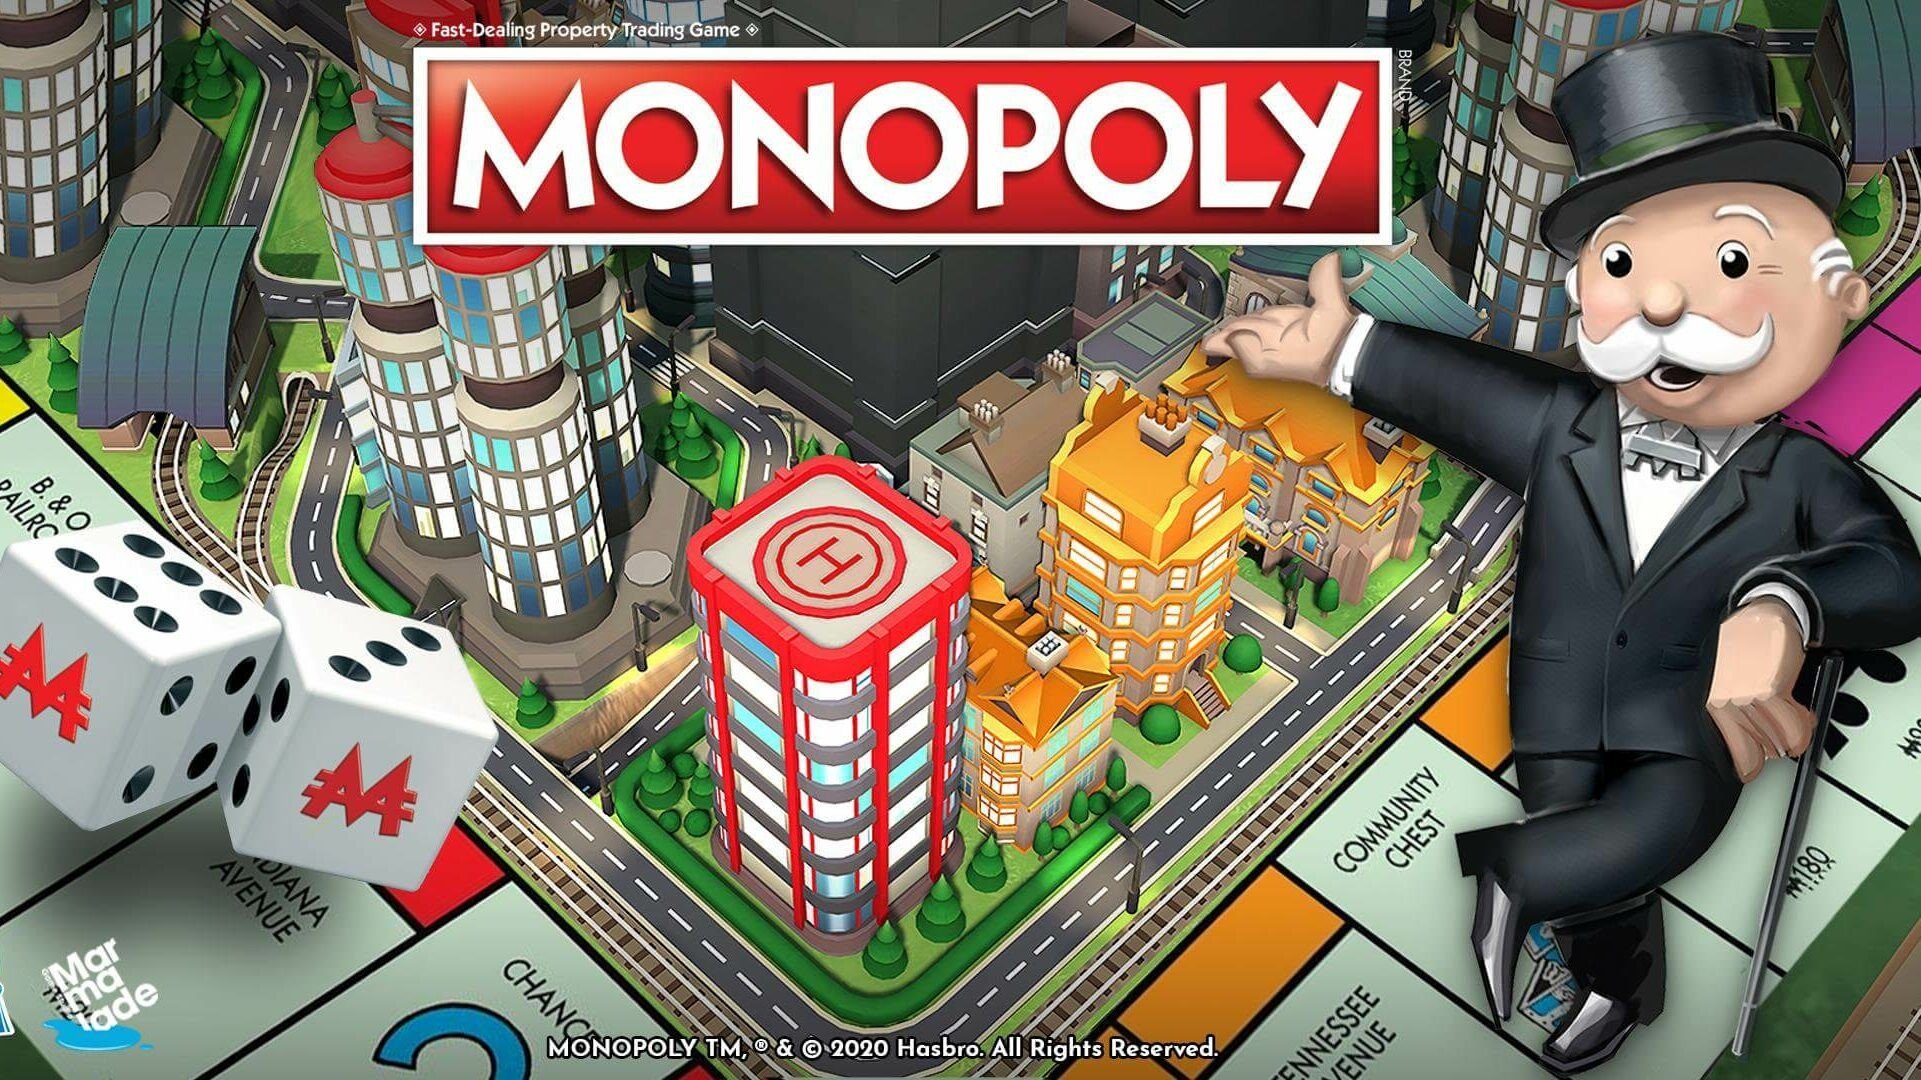 Https monopoly. Монополия. Монополия игра. Монополист игра. Мнополия1.